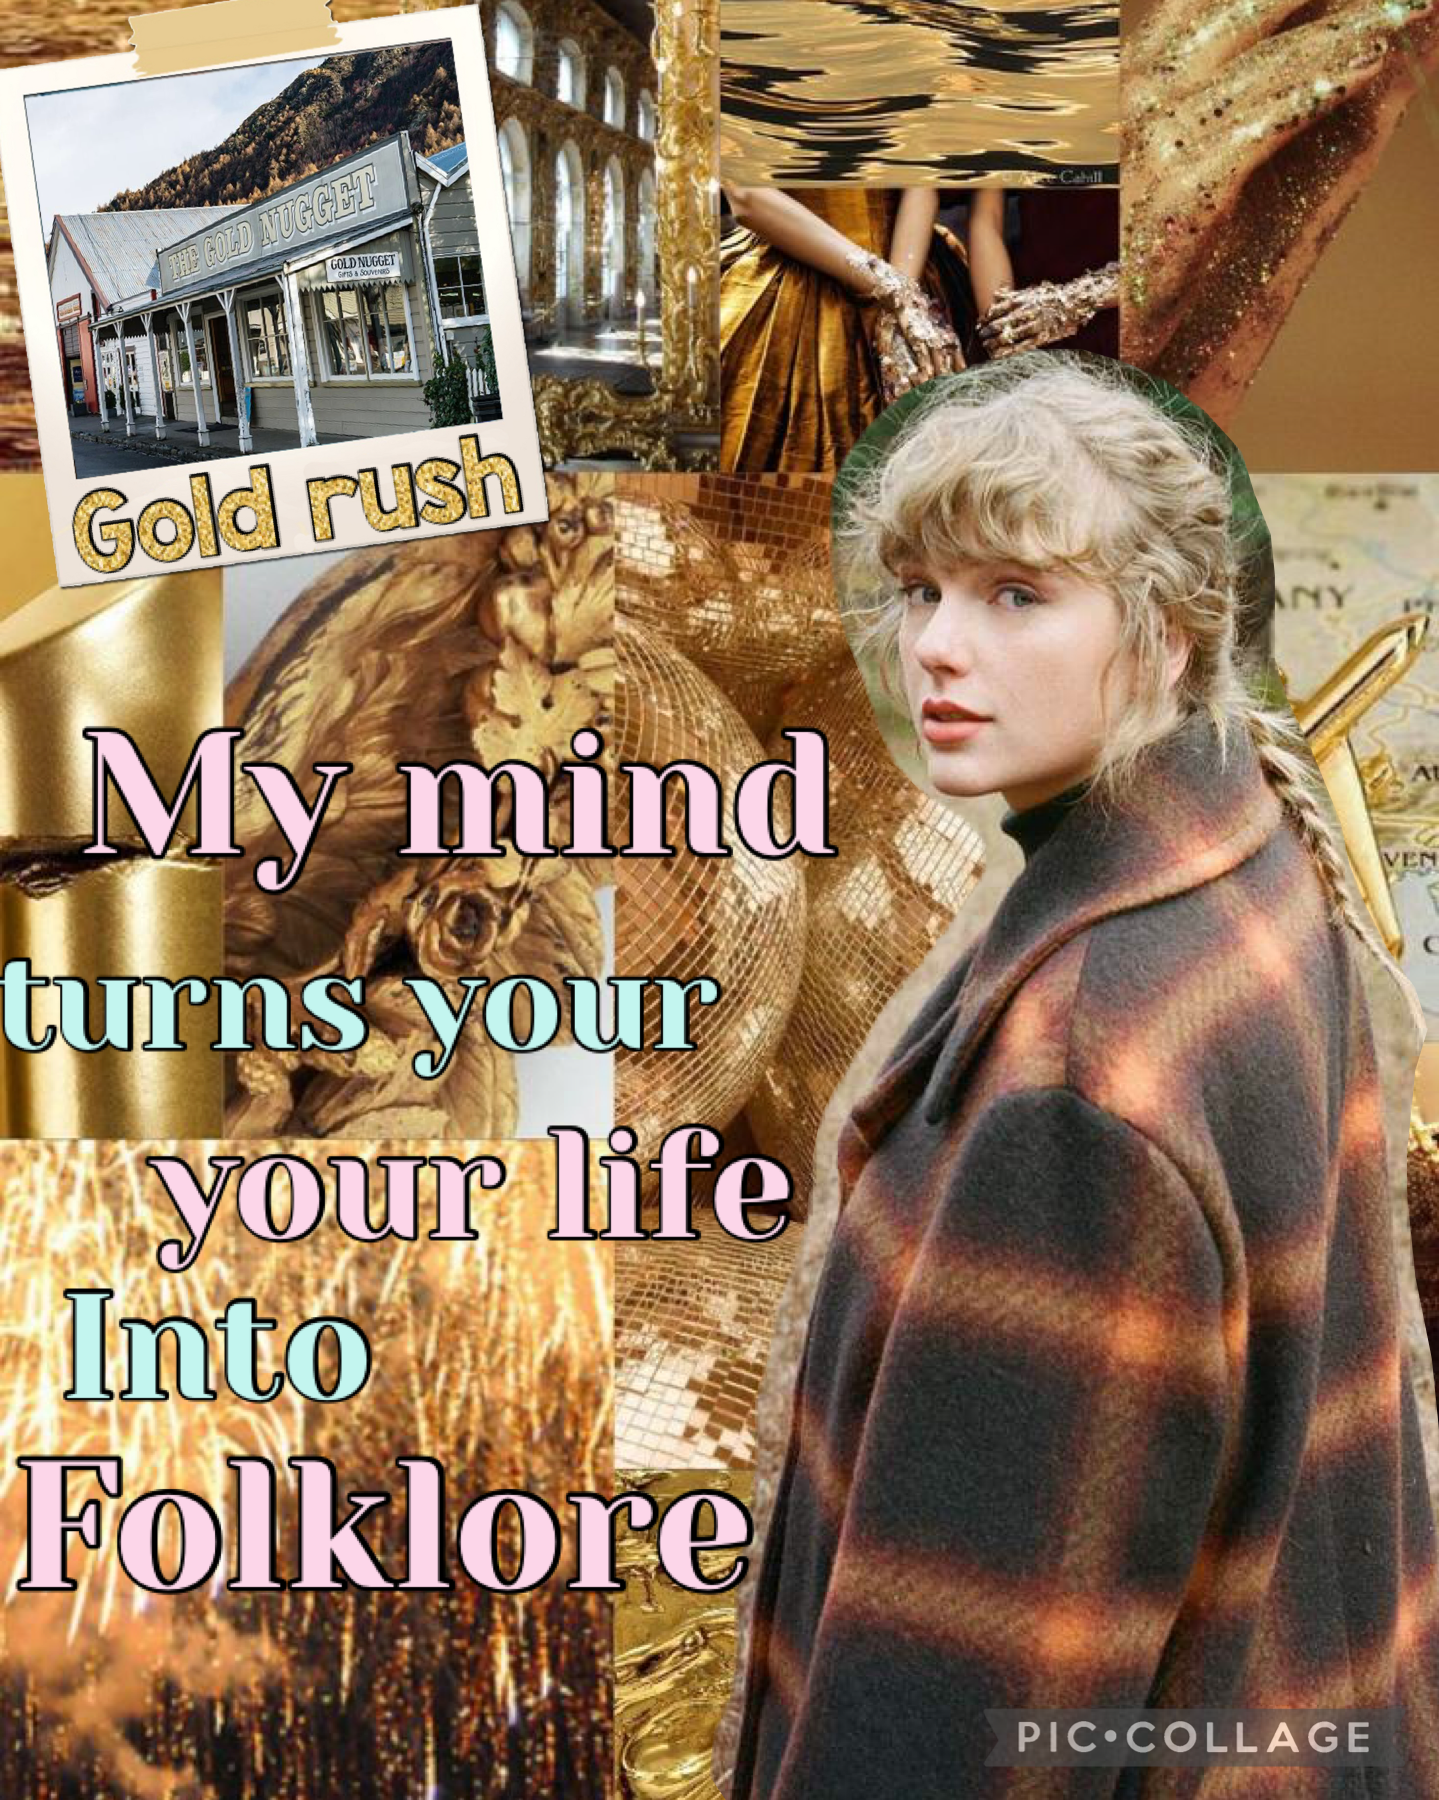 Taylor swift gold rush aesthetic collage entry to Sonic the great contest 3.9.21